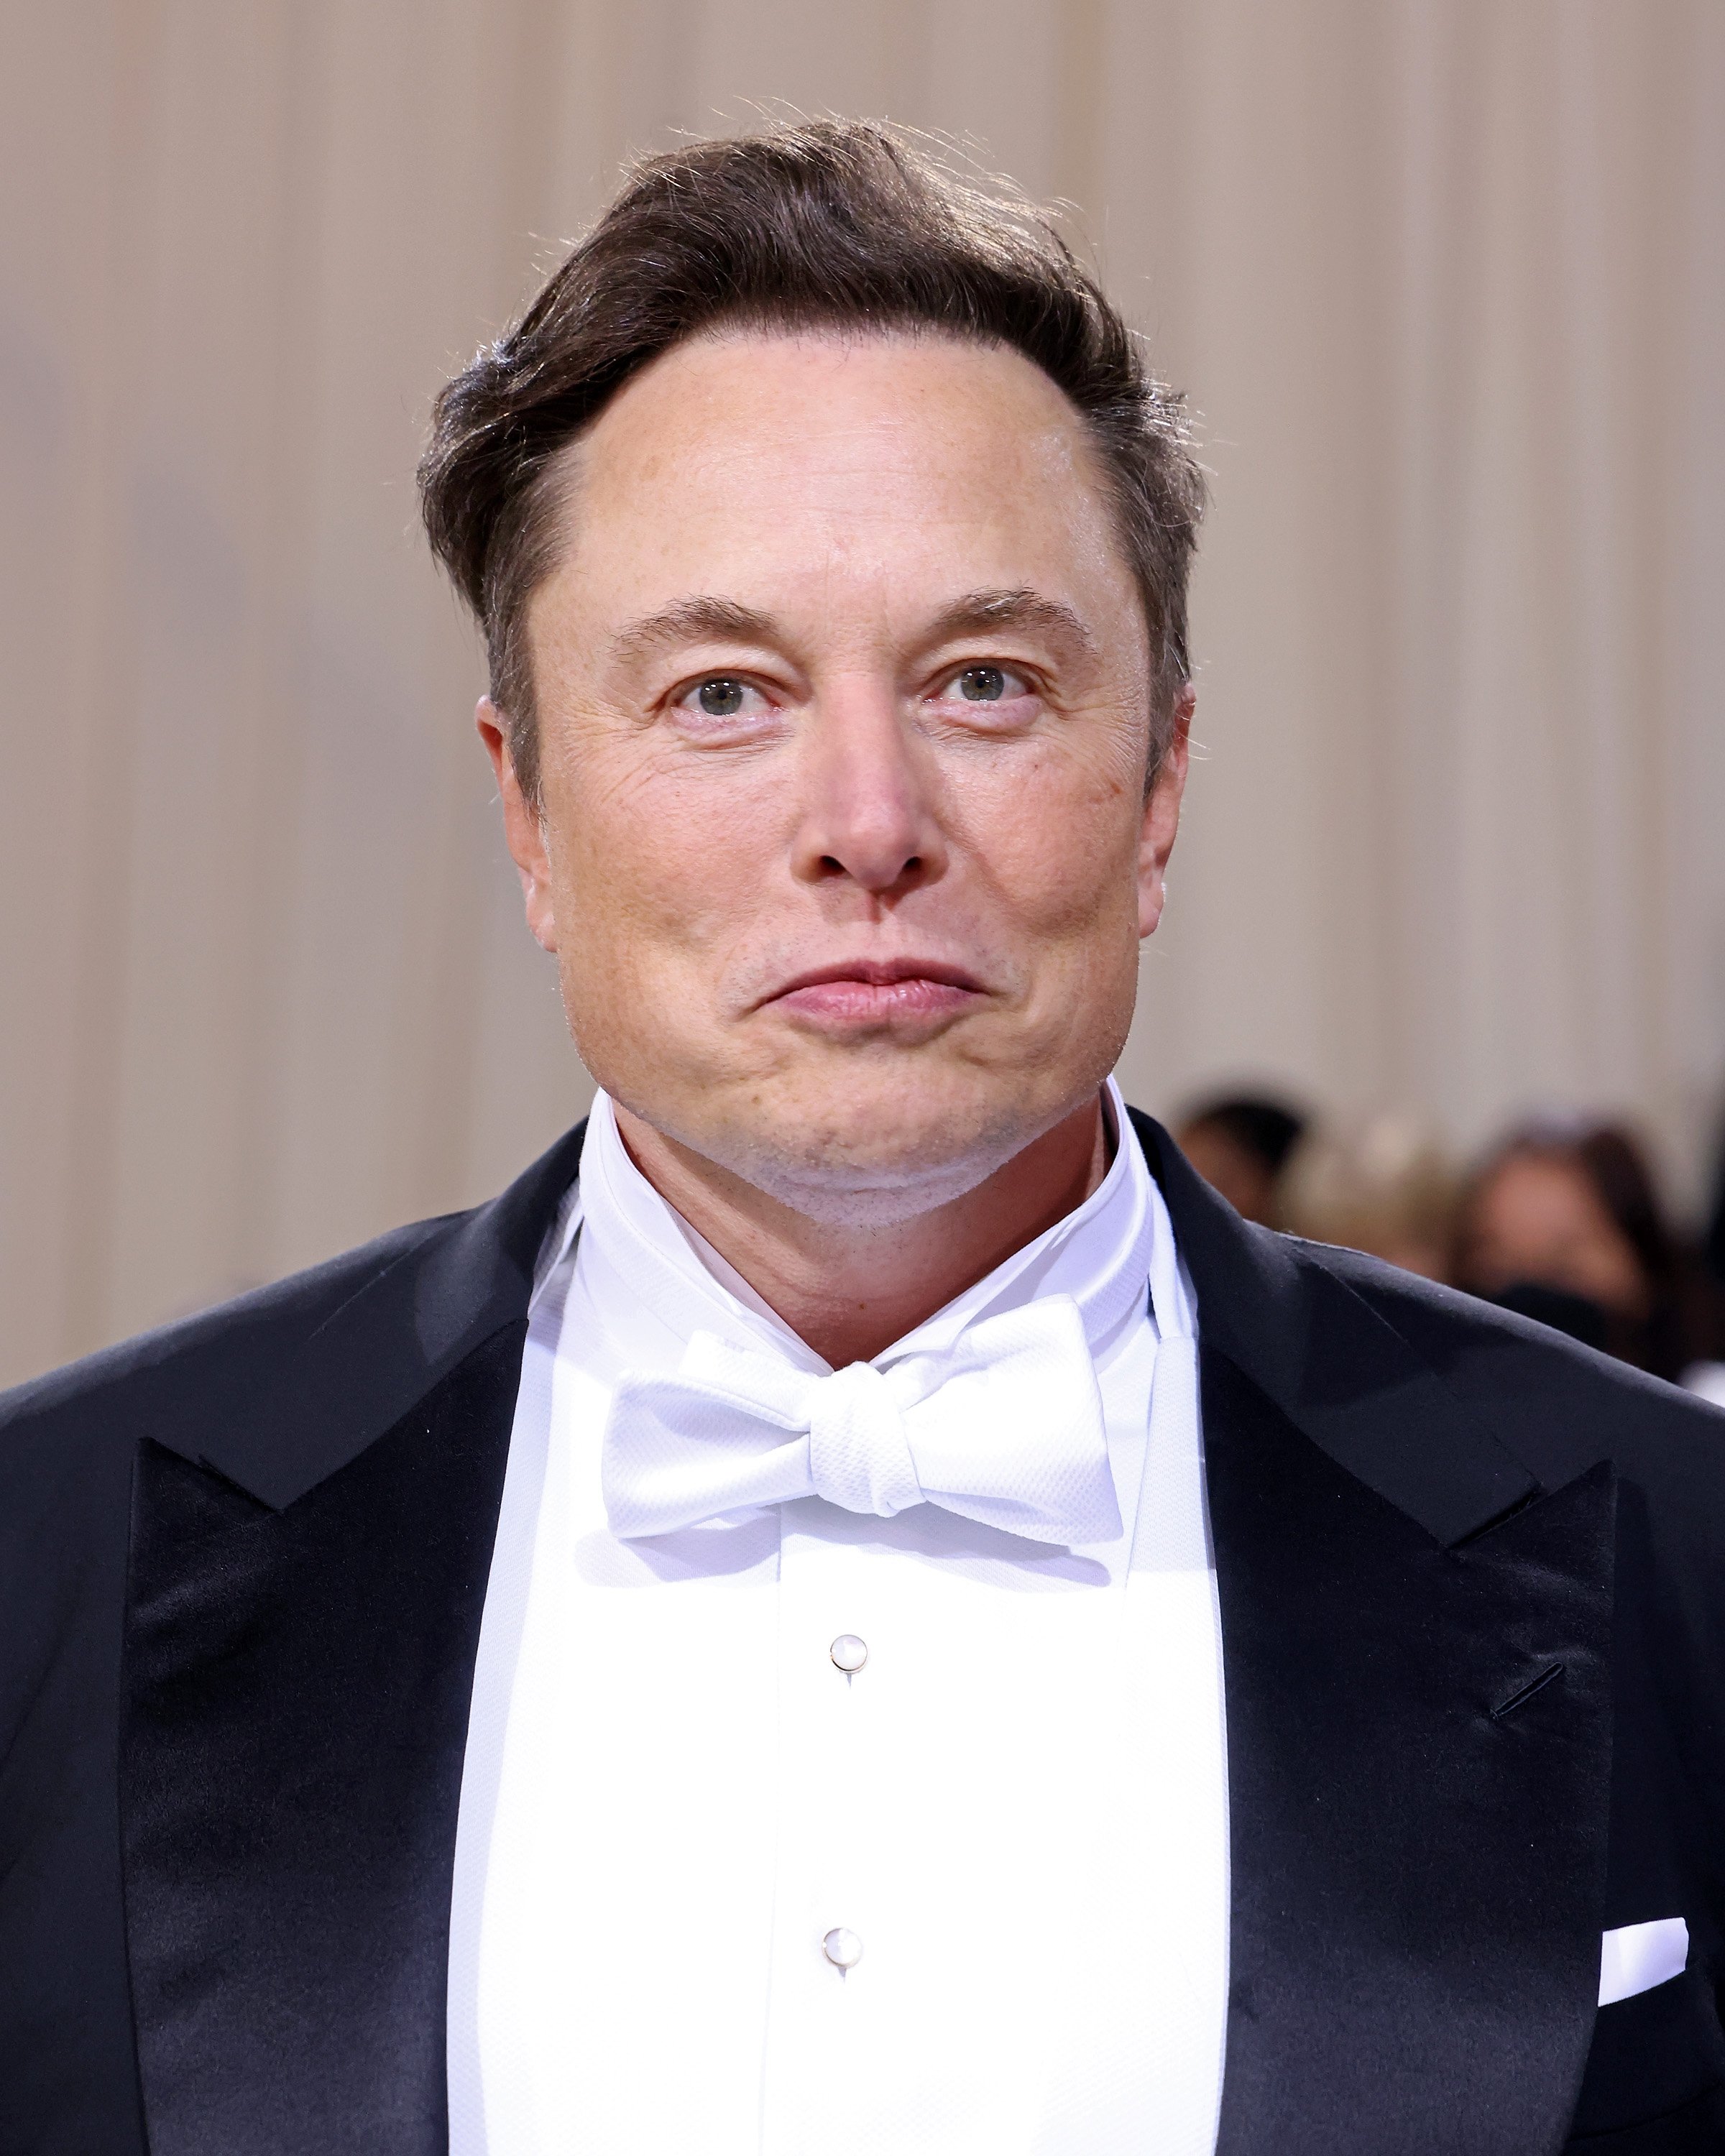 Elon Musk attends "In America: An Anthology of Fashion," the 2022 Costume Institute Benefit at The Metropolitan Museum of Art on May 2, 2022, in New York City. | Source: Getty Images